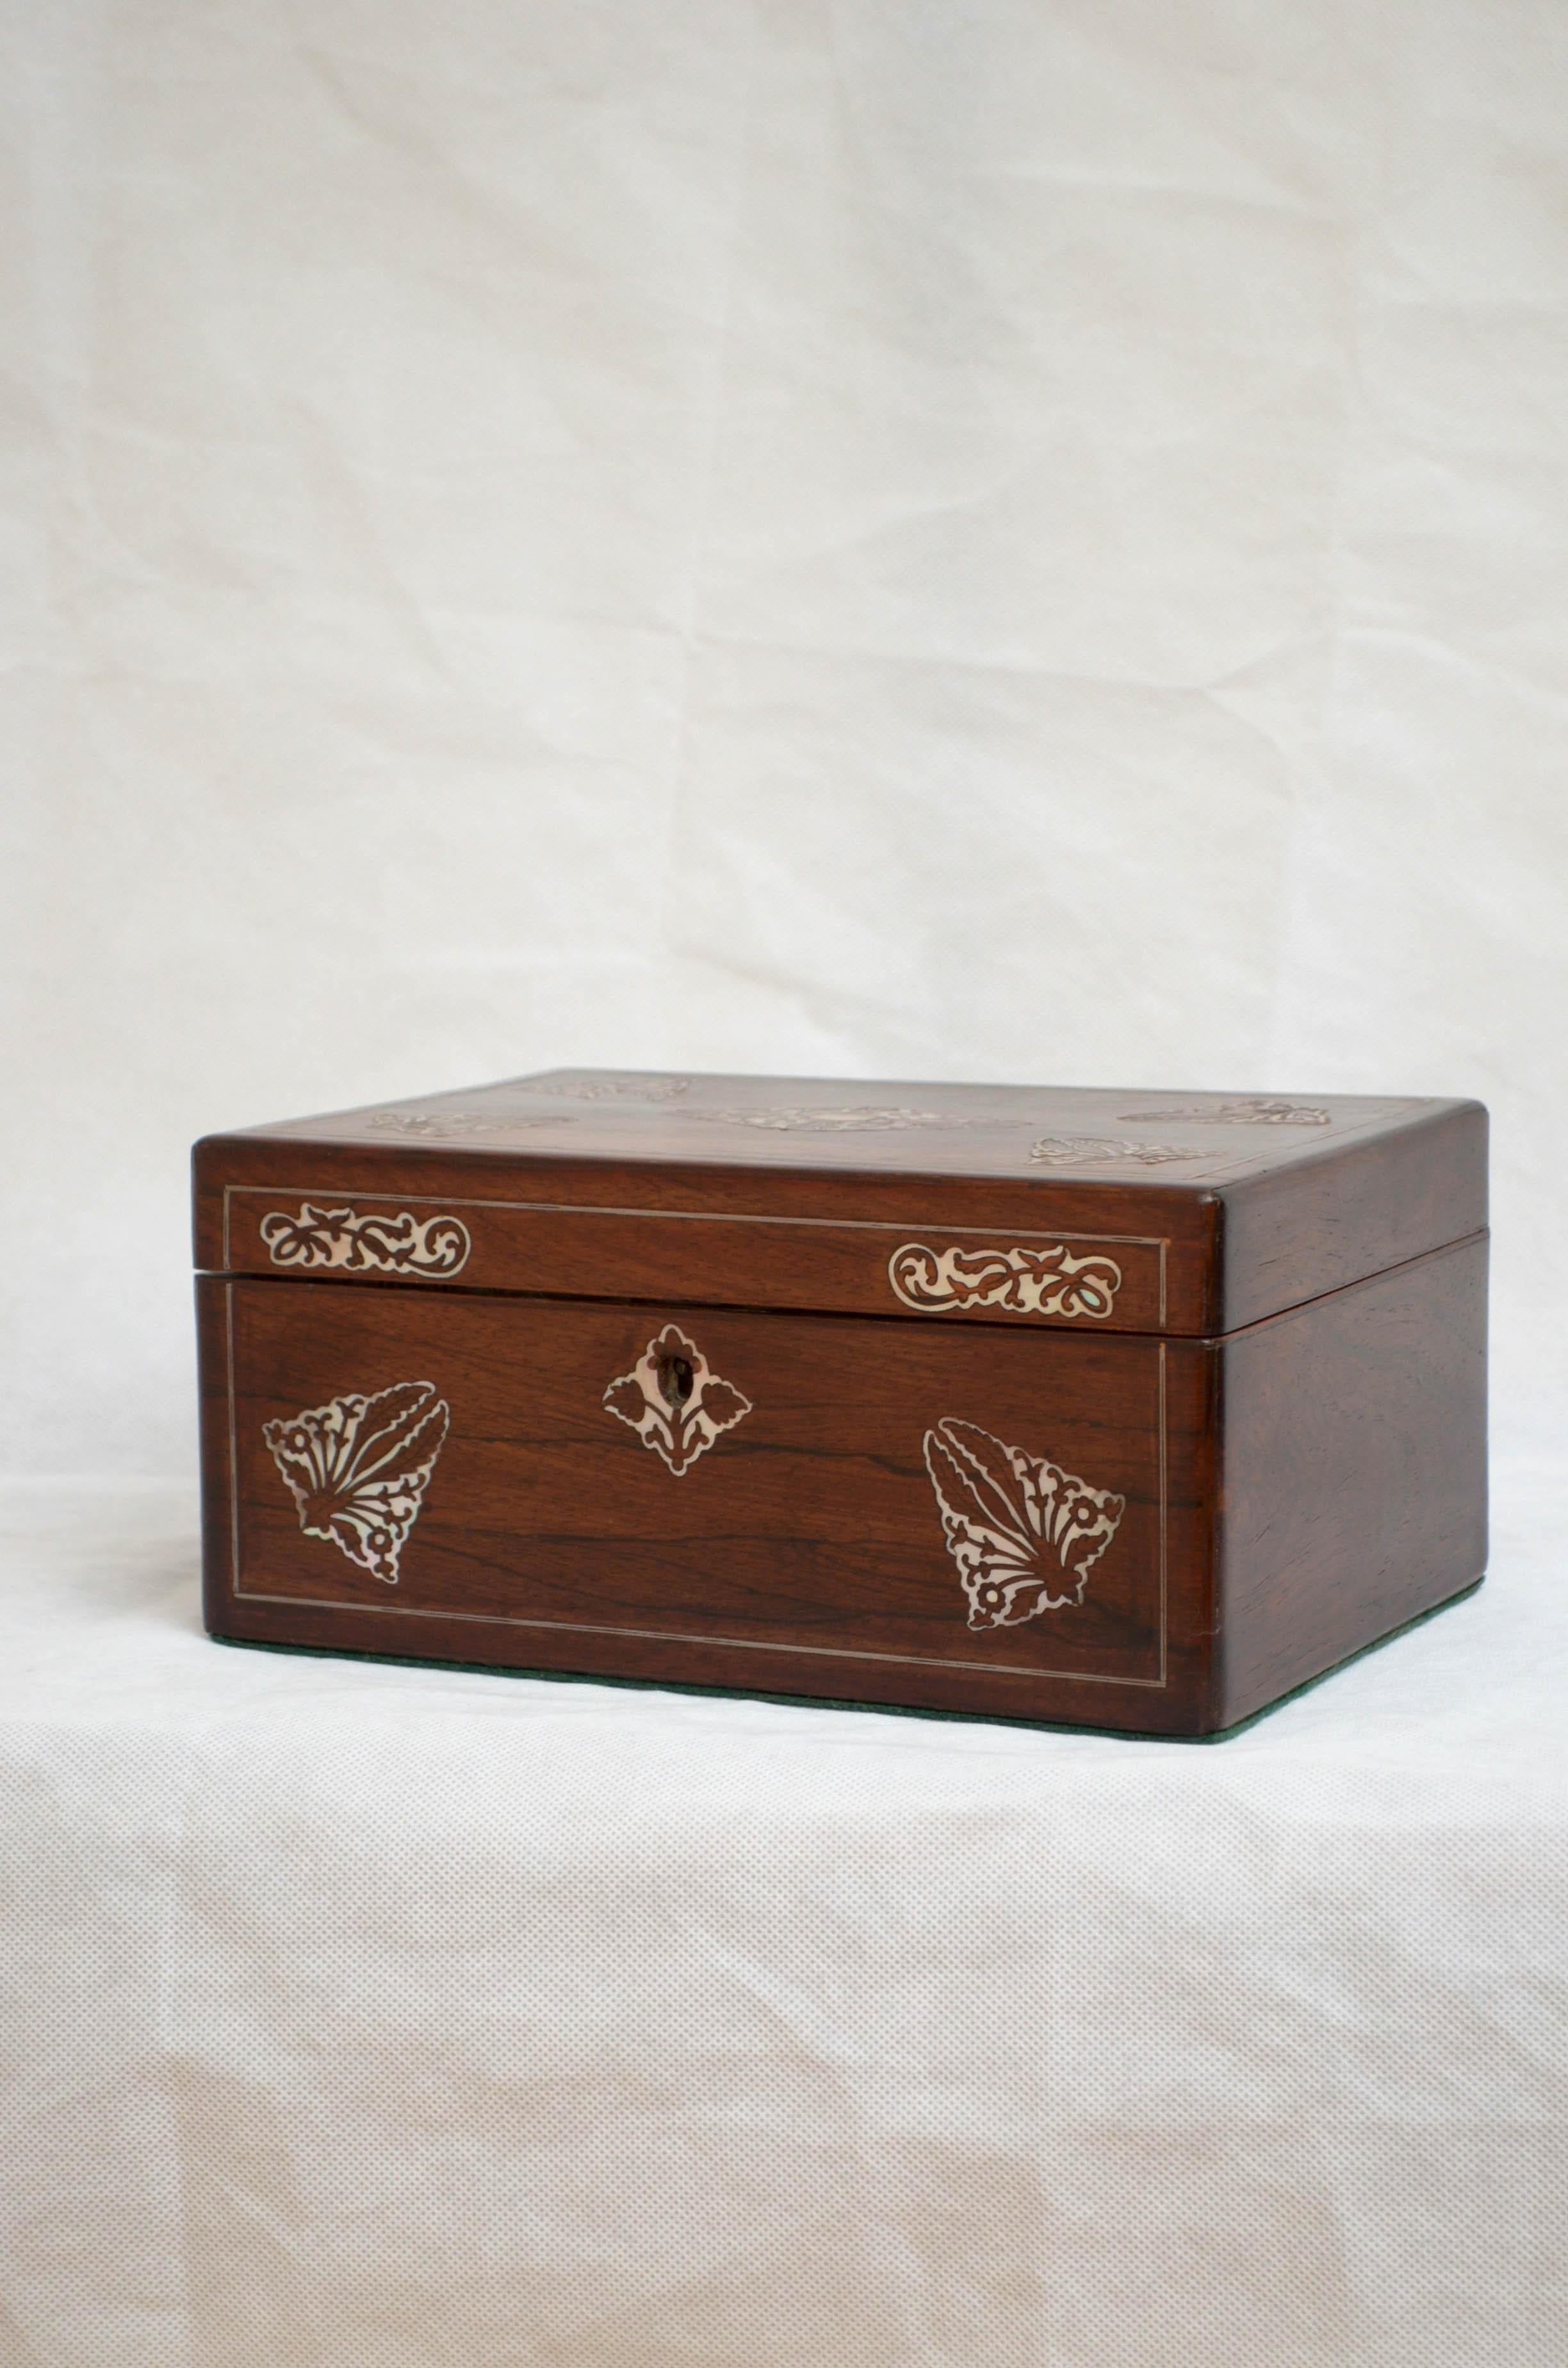 K080 elegant early Victorian rosewood sewing box or jewelry box with beautiful mother of pearl inlaid front and hinged top enclosing new relined interior with lift up tray. This antique box has been sympathetically restored including the interior,